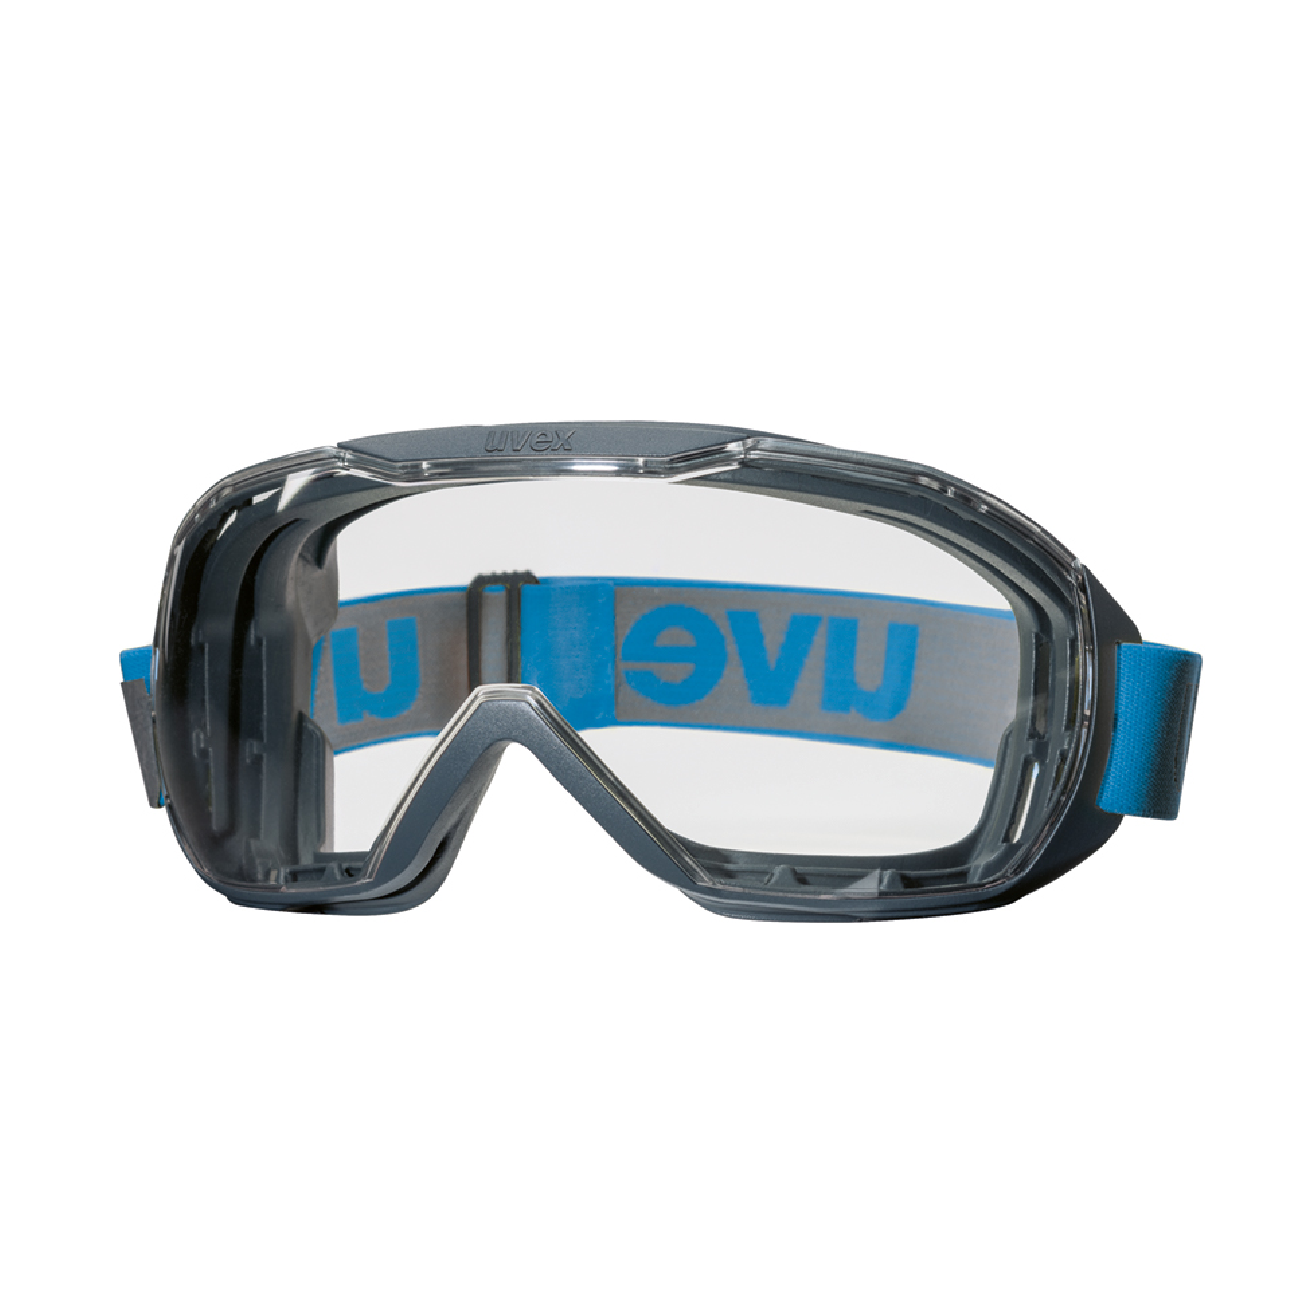 UVEX 9320-466 MEGASONIC CB Safety Goggle Clear Lens